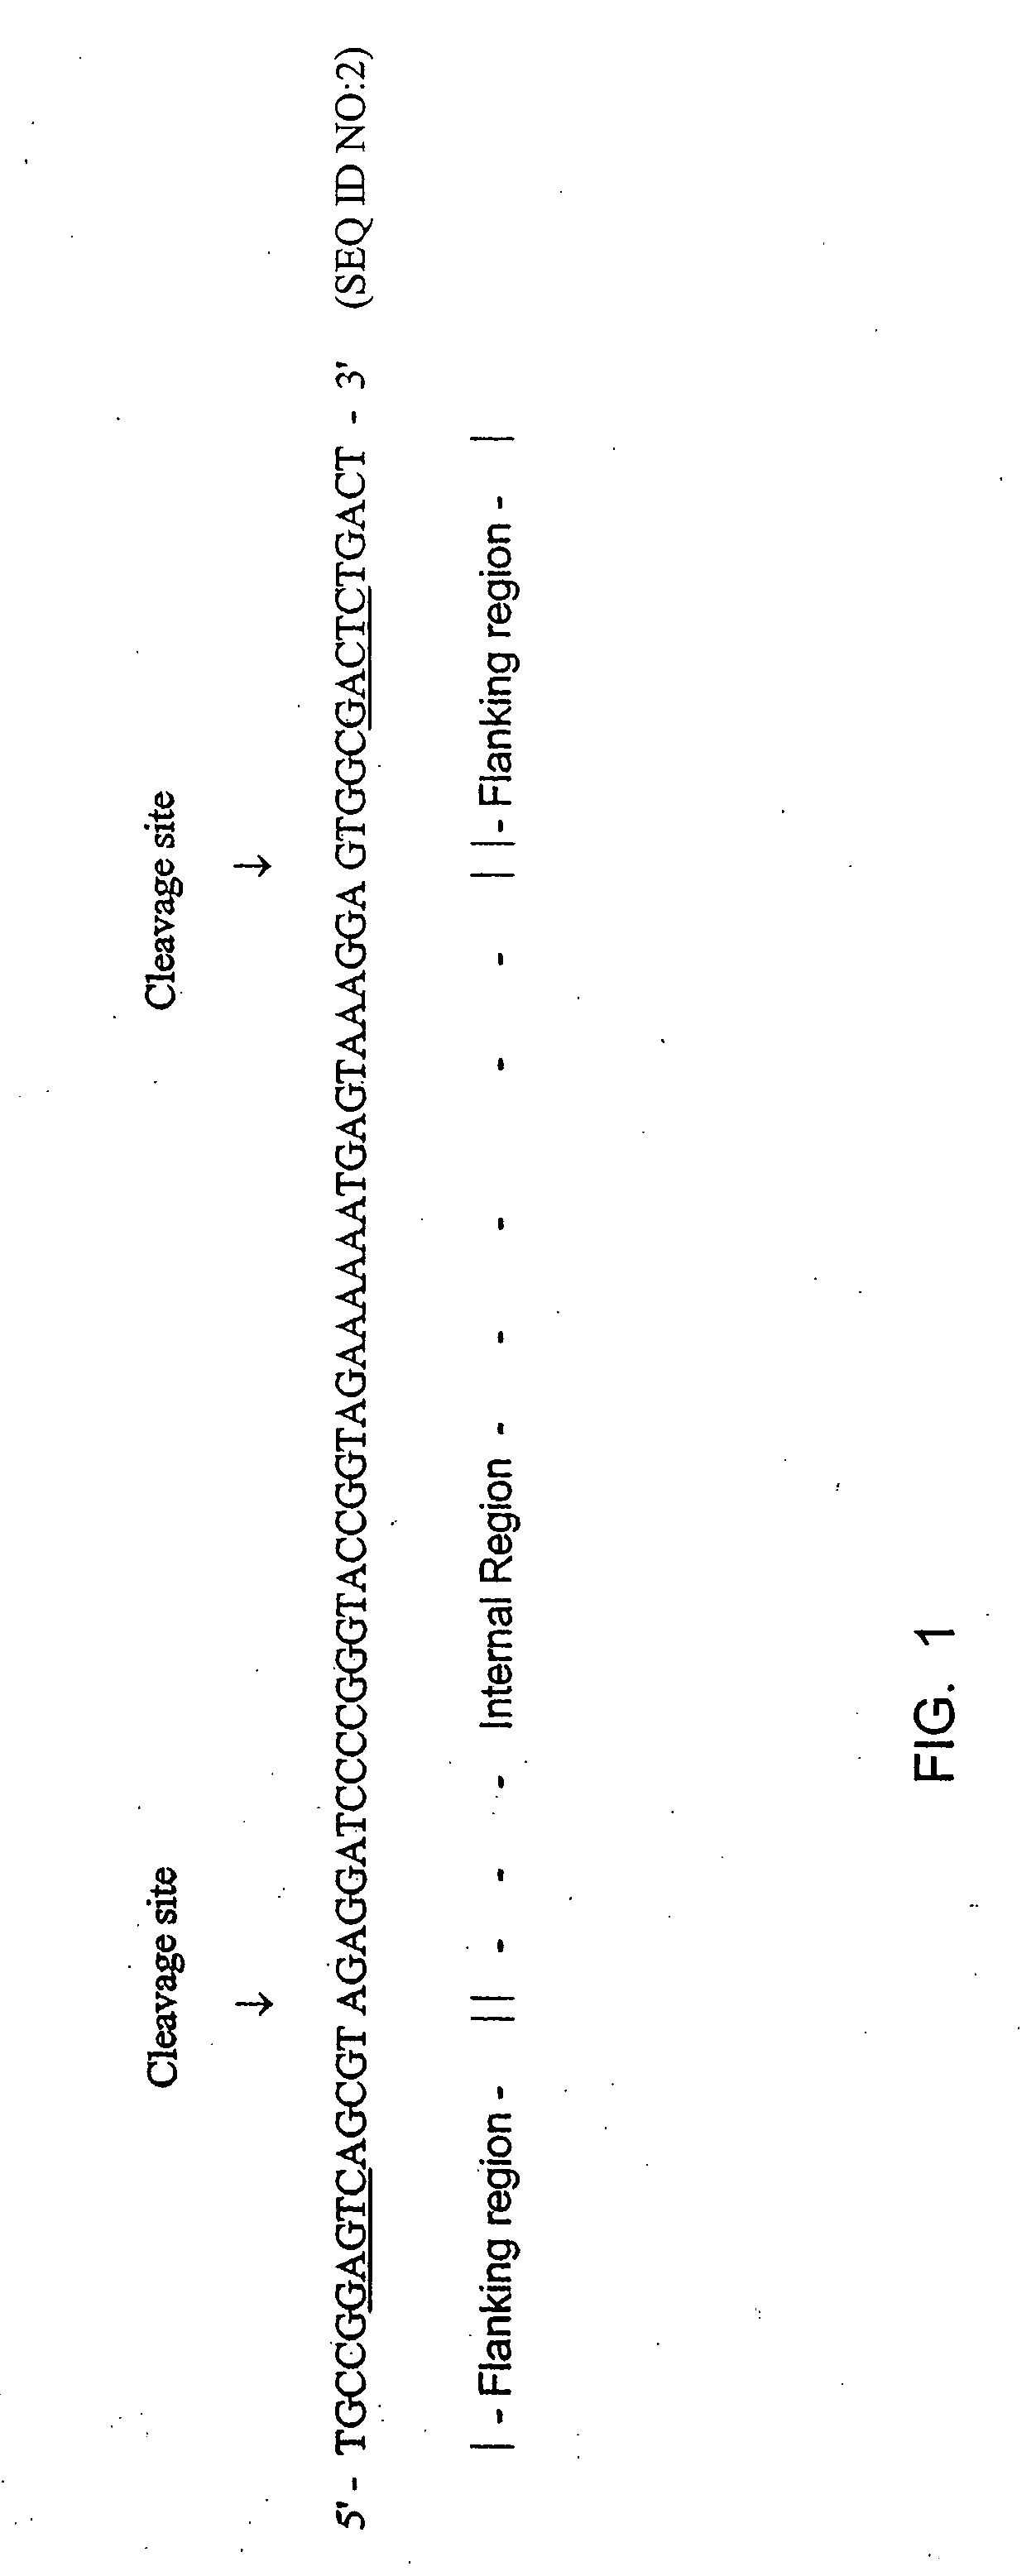 Methods for rapid production of target double-stranded DNA sequences